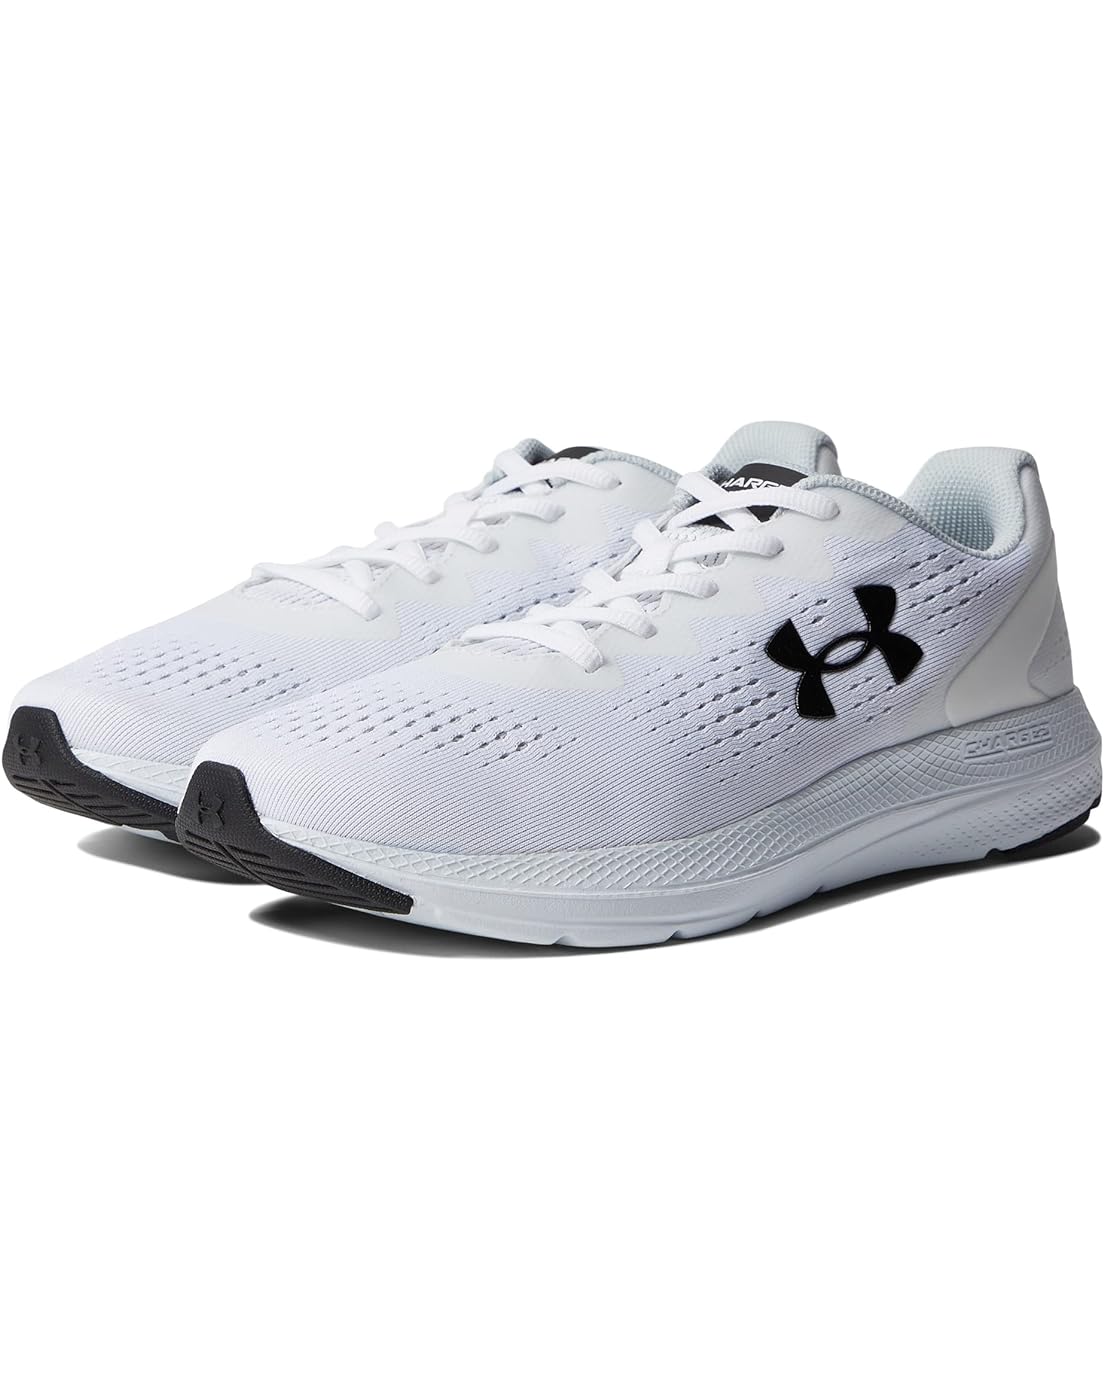 Under Armour Charged Impulse 2